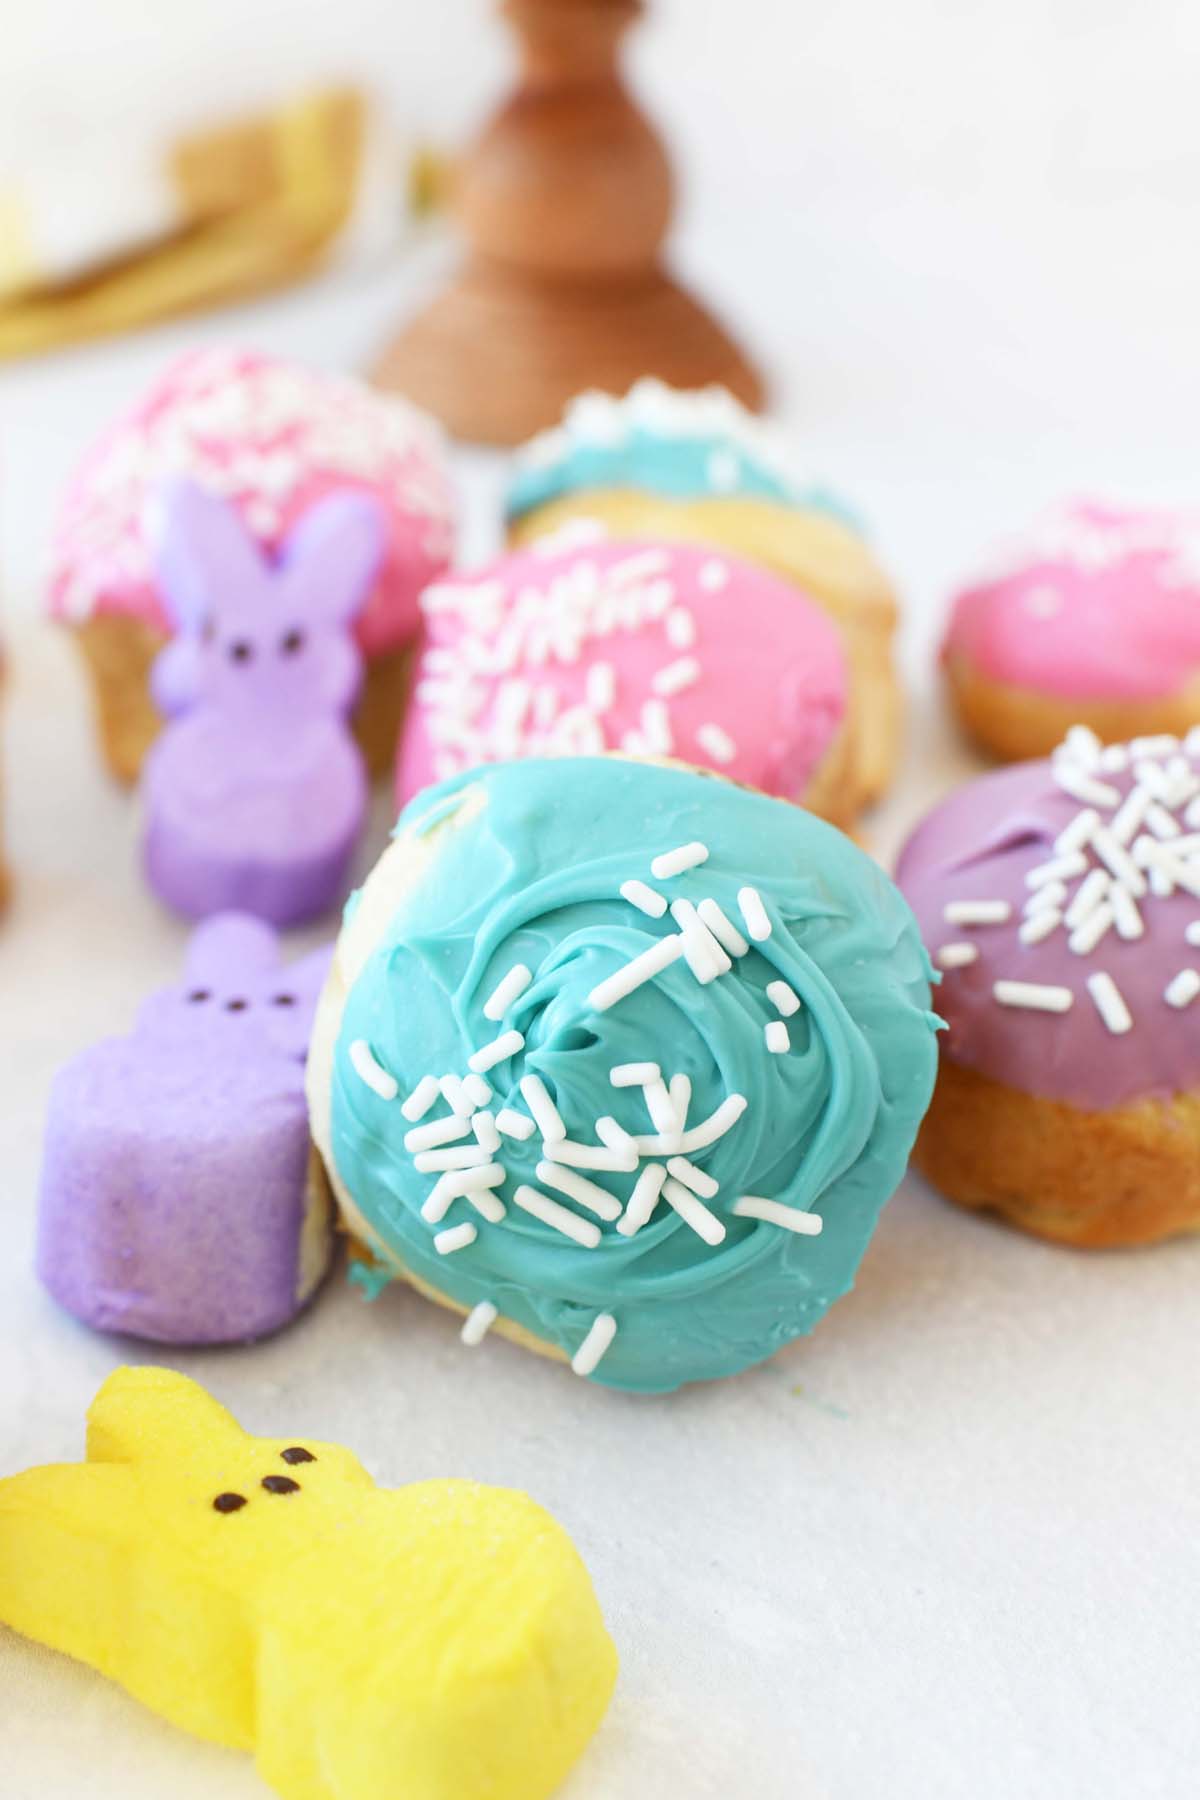 Peeps Magic Rolls - Peeps stuffed crescent rolls with colorful candy toppings. 